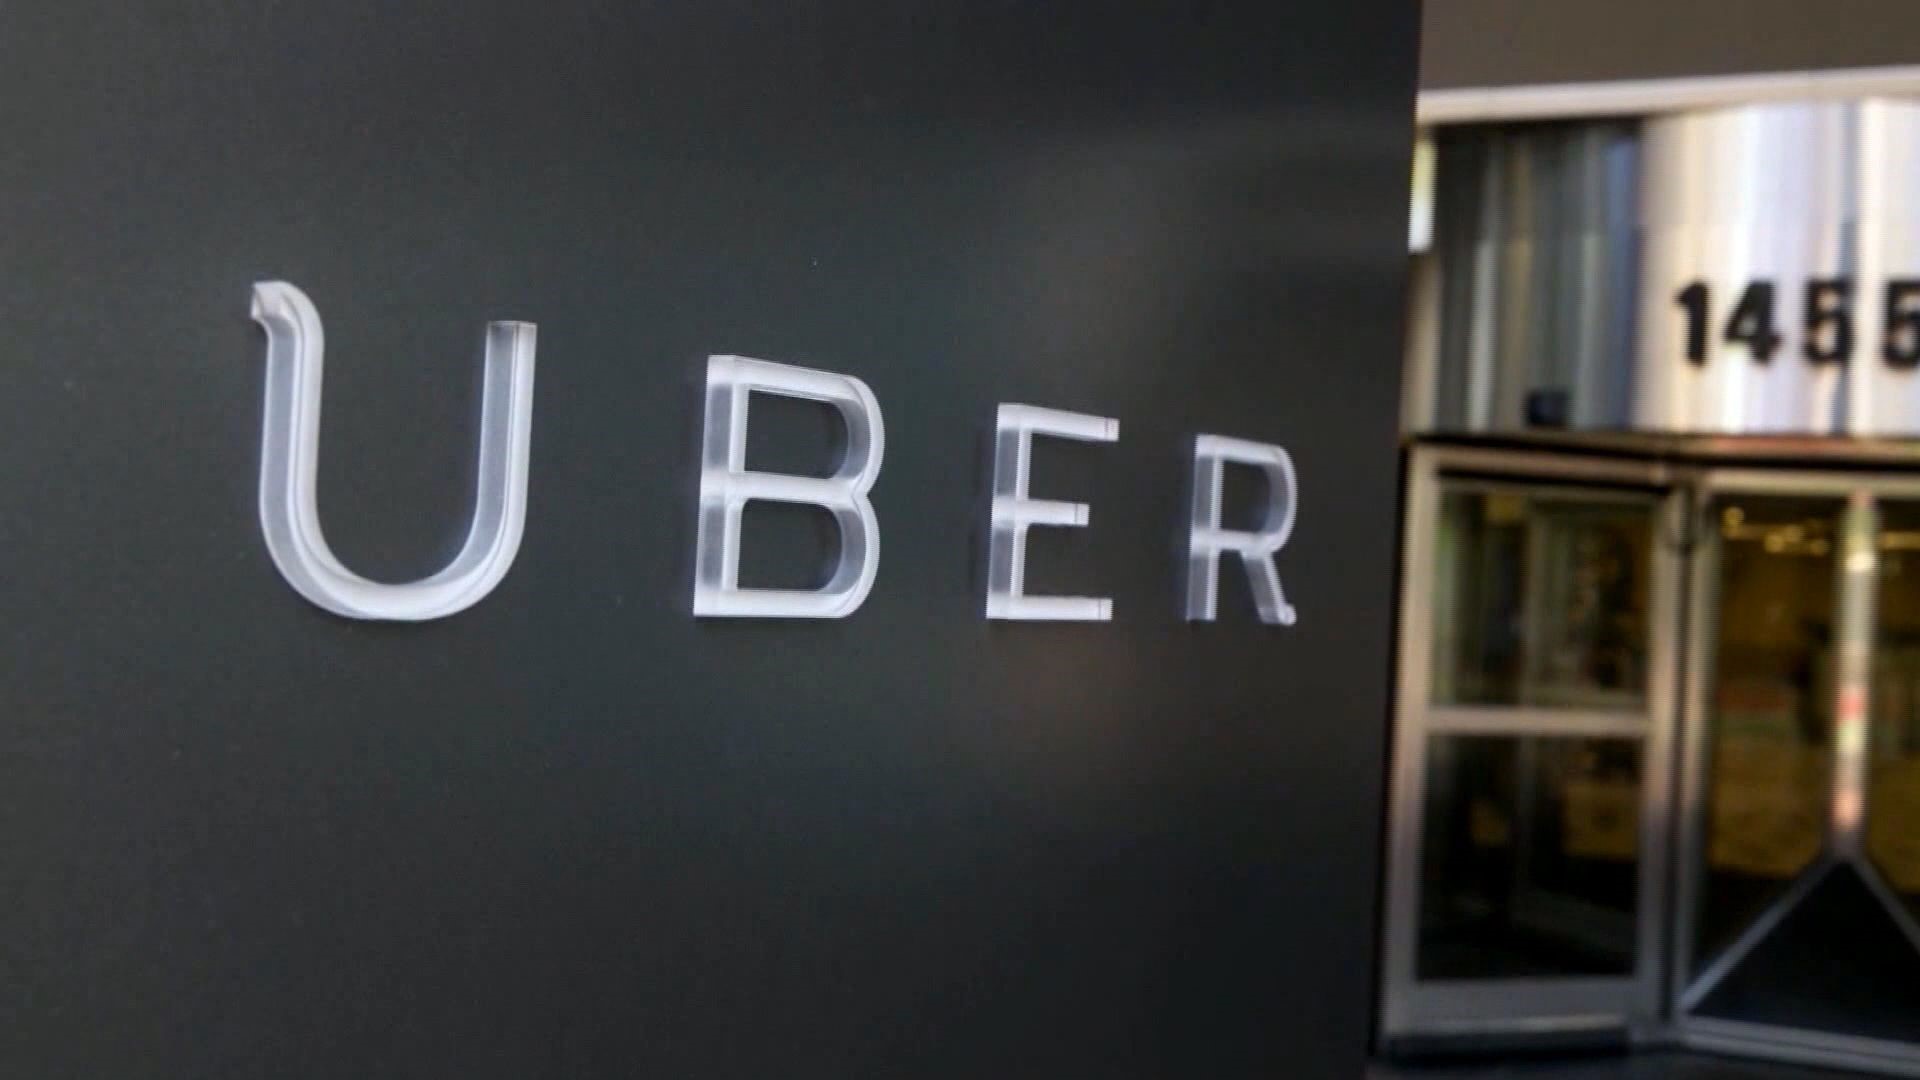 Uber is confirming thousands of sexual assaults involving its passengers and drivers.